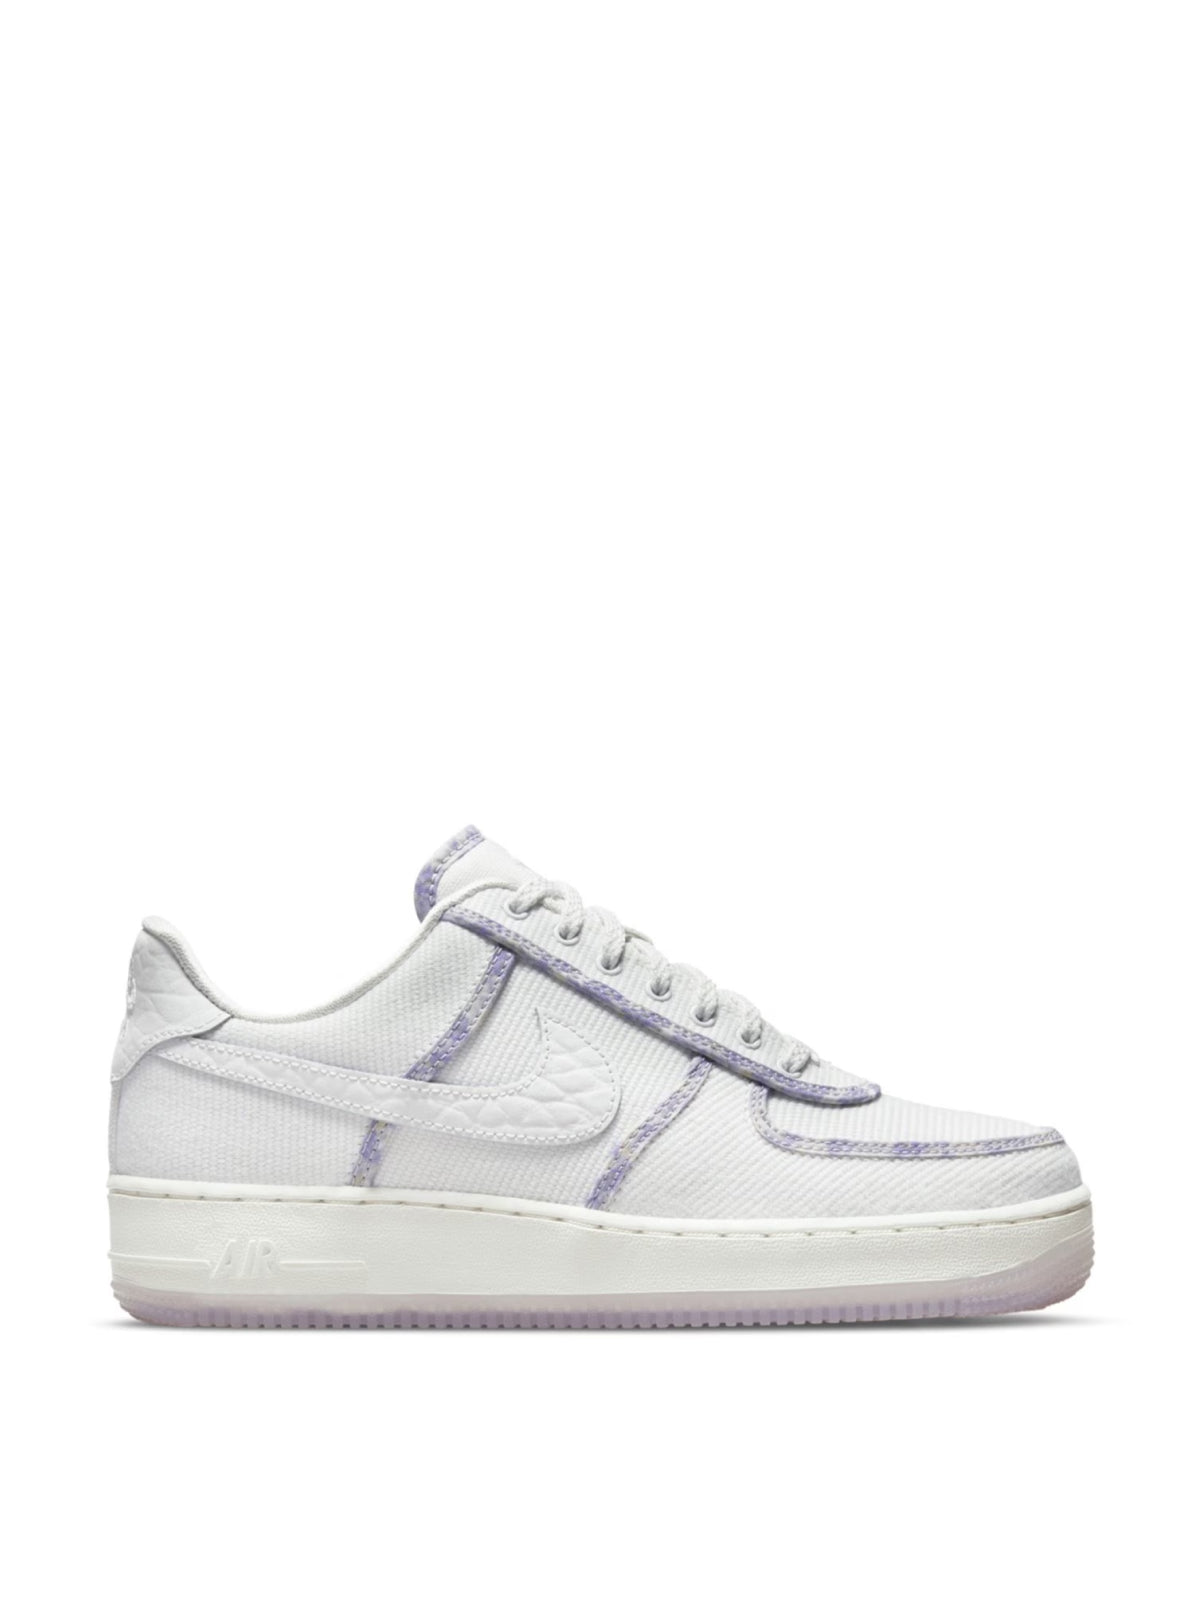 Nike-OUTLET-SALE-Air Force 1 Low Lavender Sneakers-ARCHIVIST